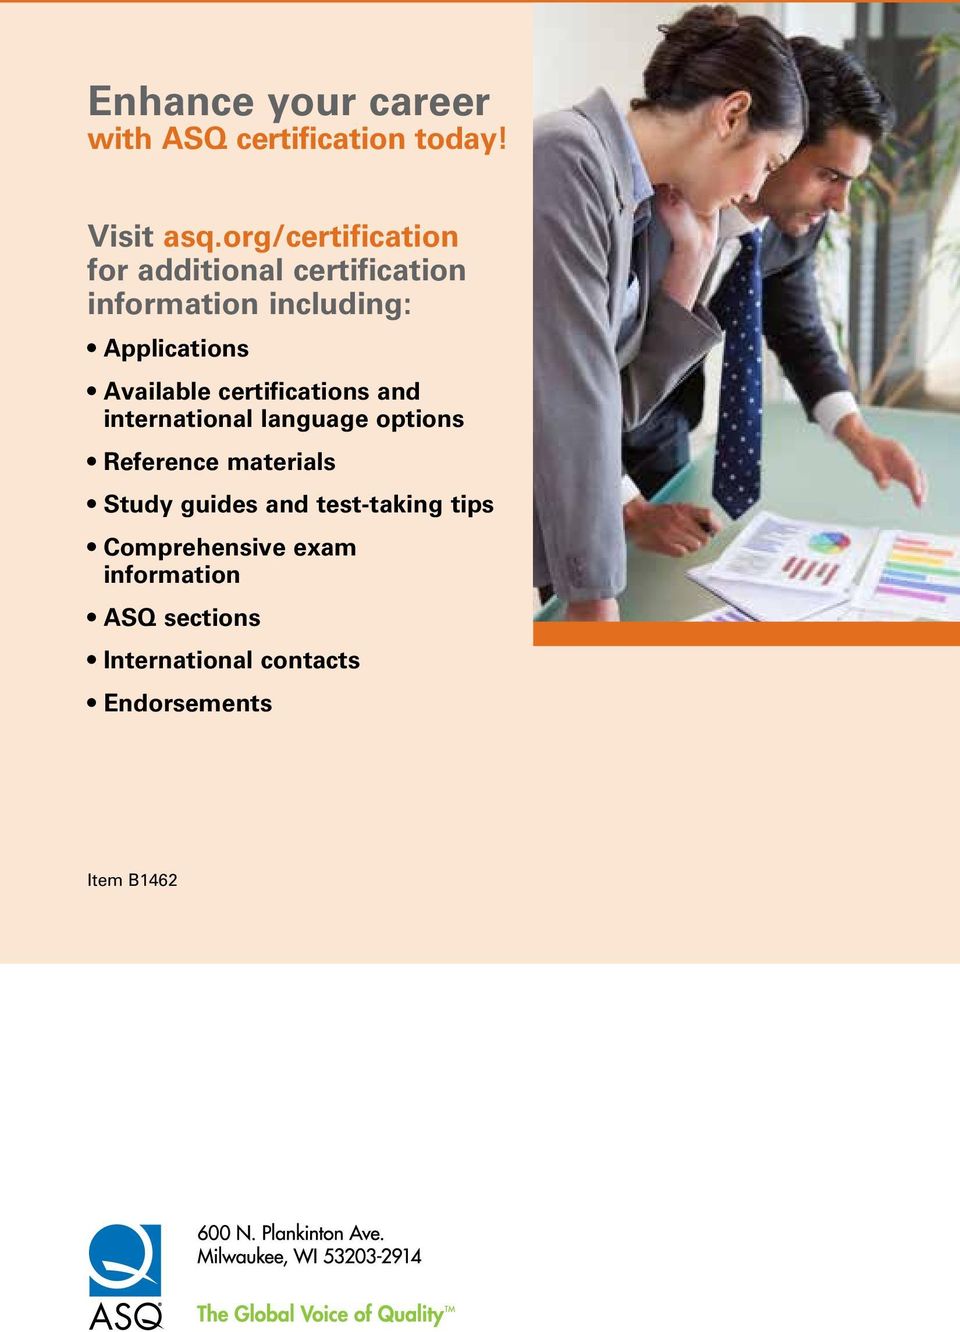 test-taking tips Comprehensive exam information ASQ Sections International contacts Endorsements information including: Enhance your career with ASQ certification today!